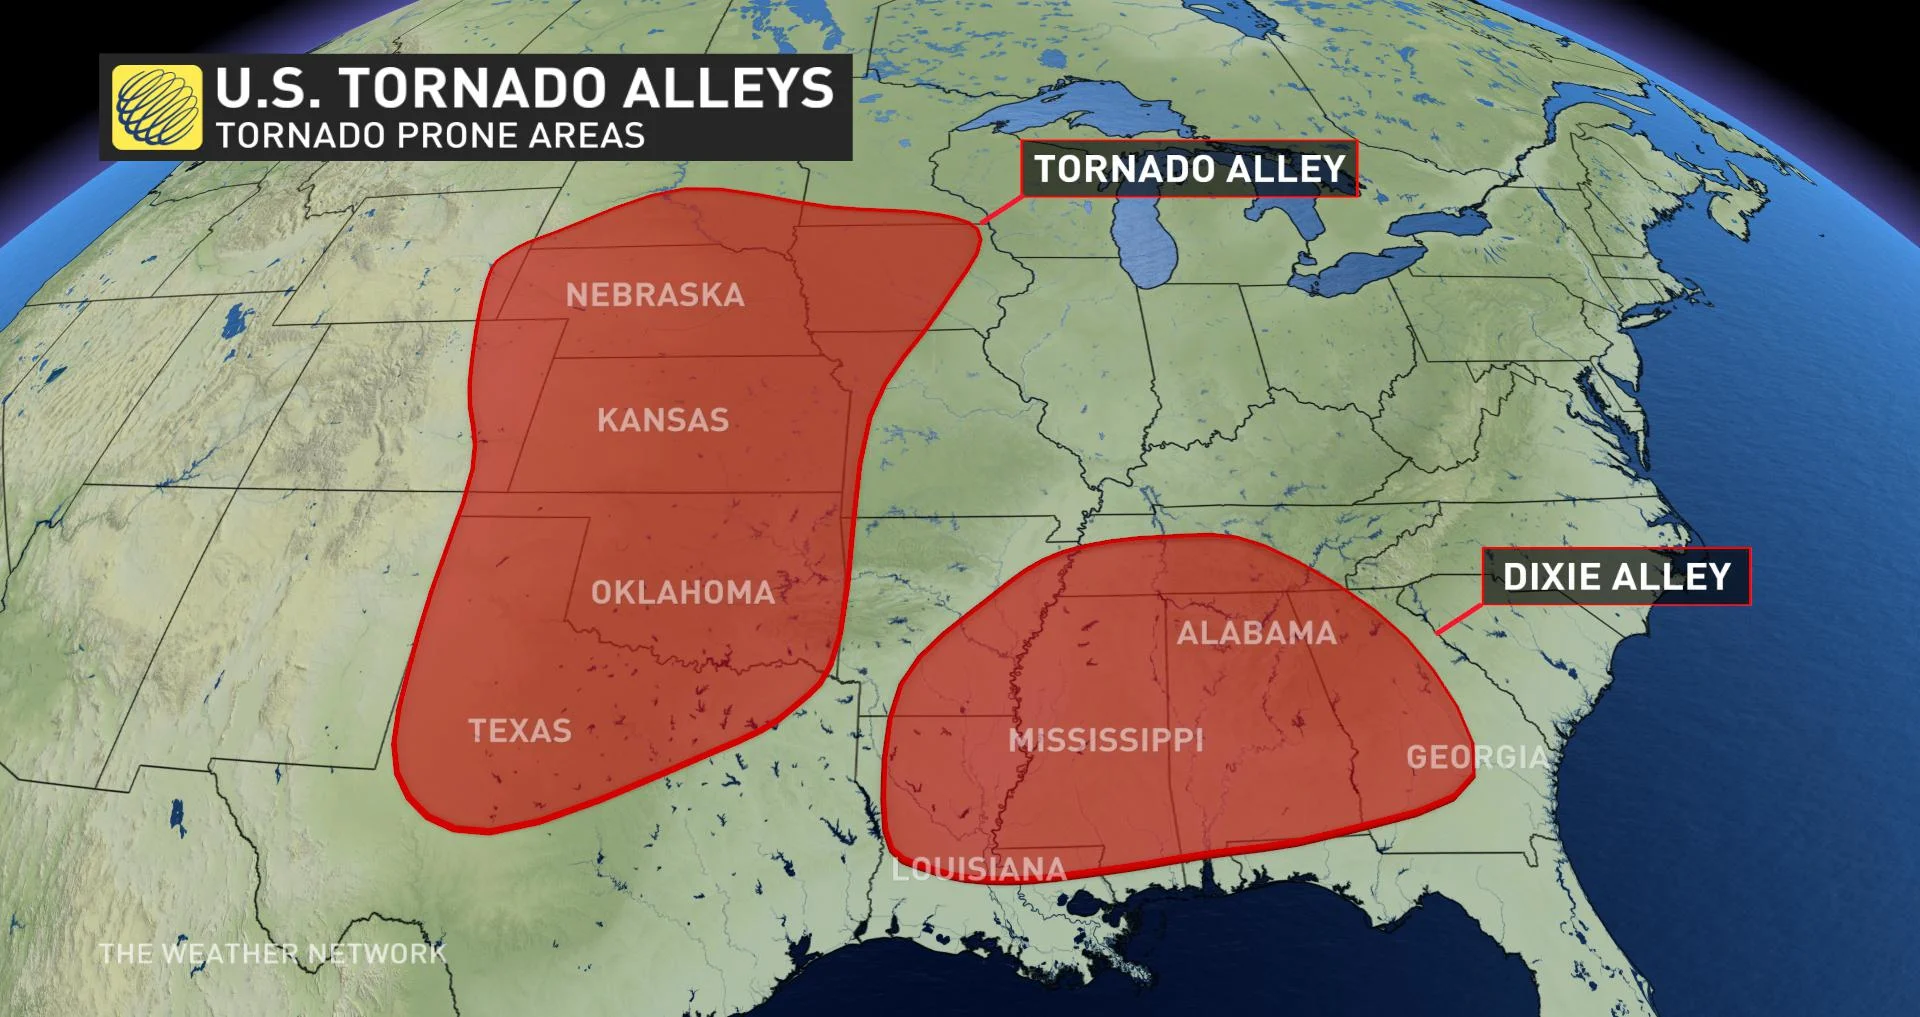 April 20, 2020 - Dixie Alley and Tornado Alley